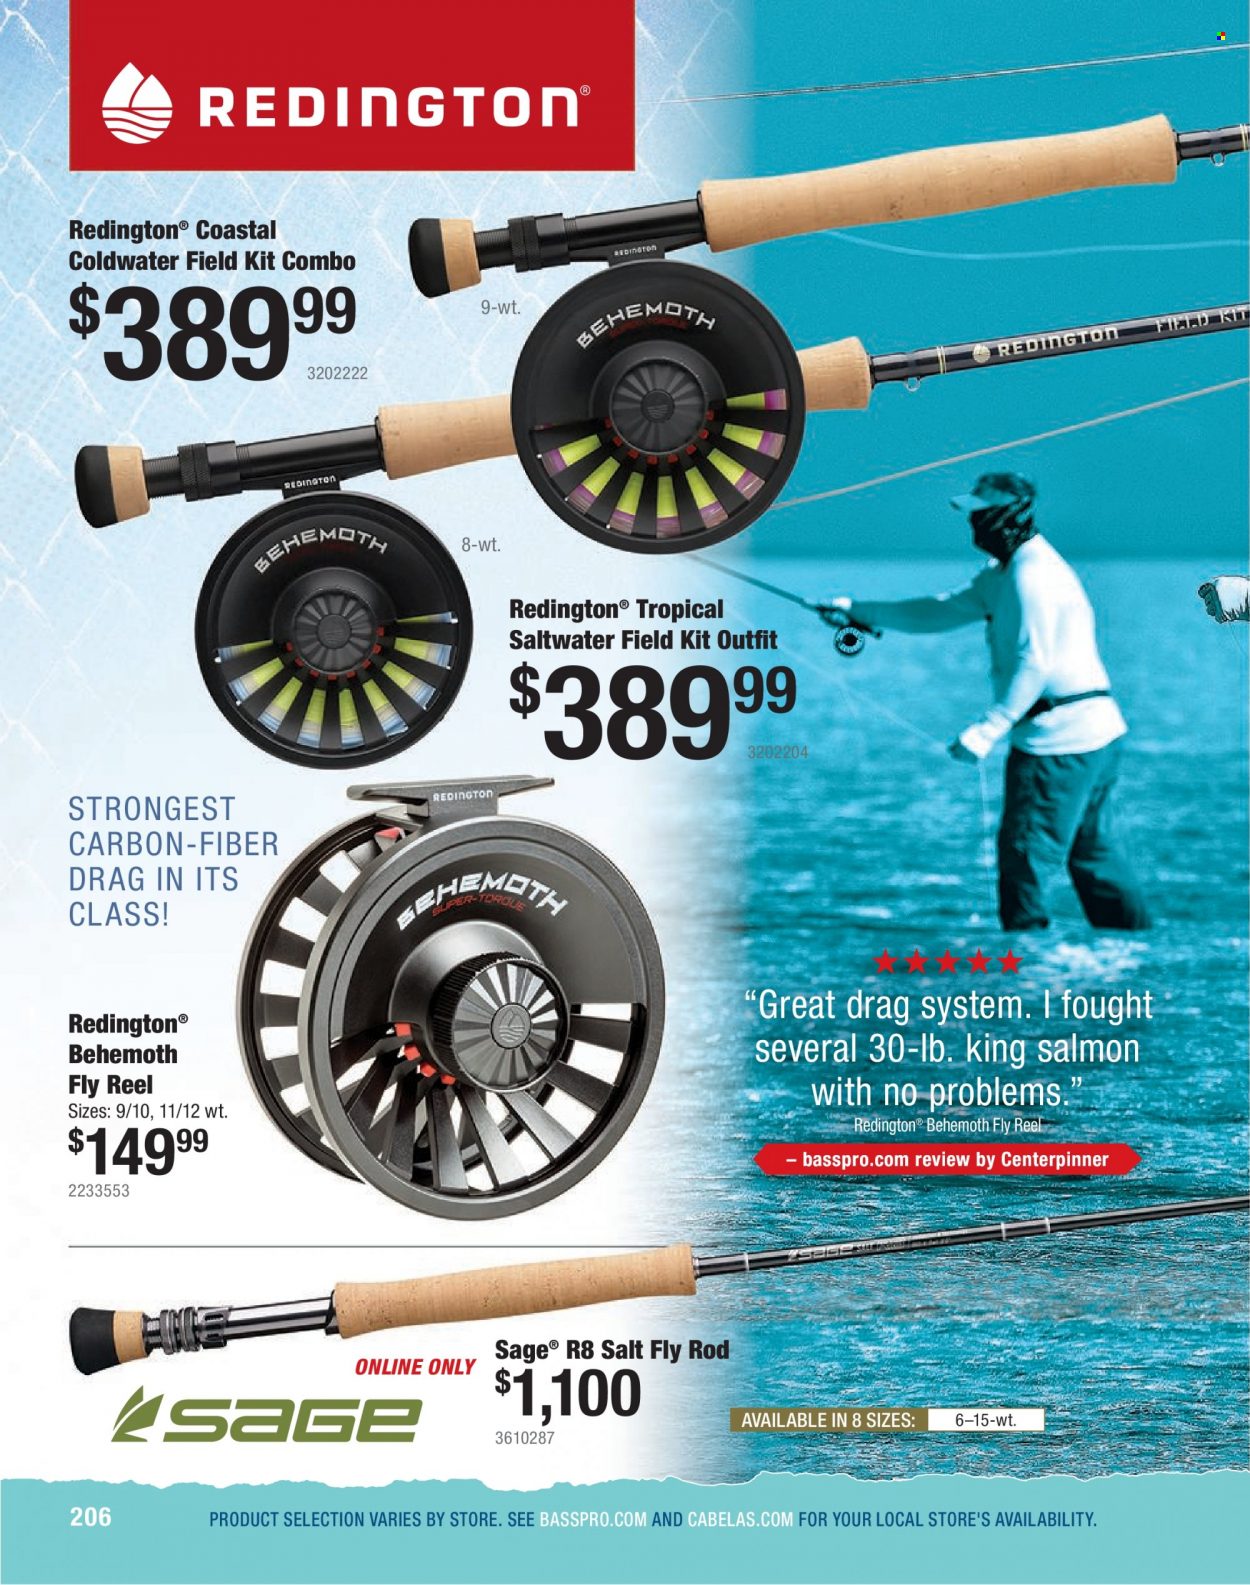 Bass Pro Shops Flyer - Sales products - reel. Page 206.